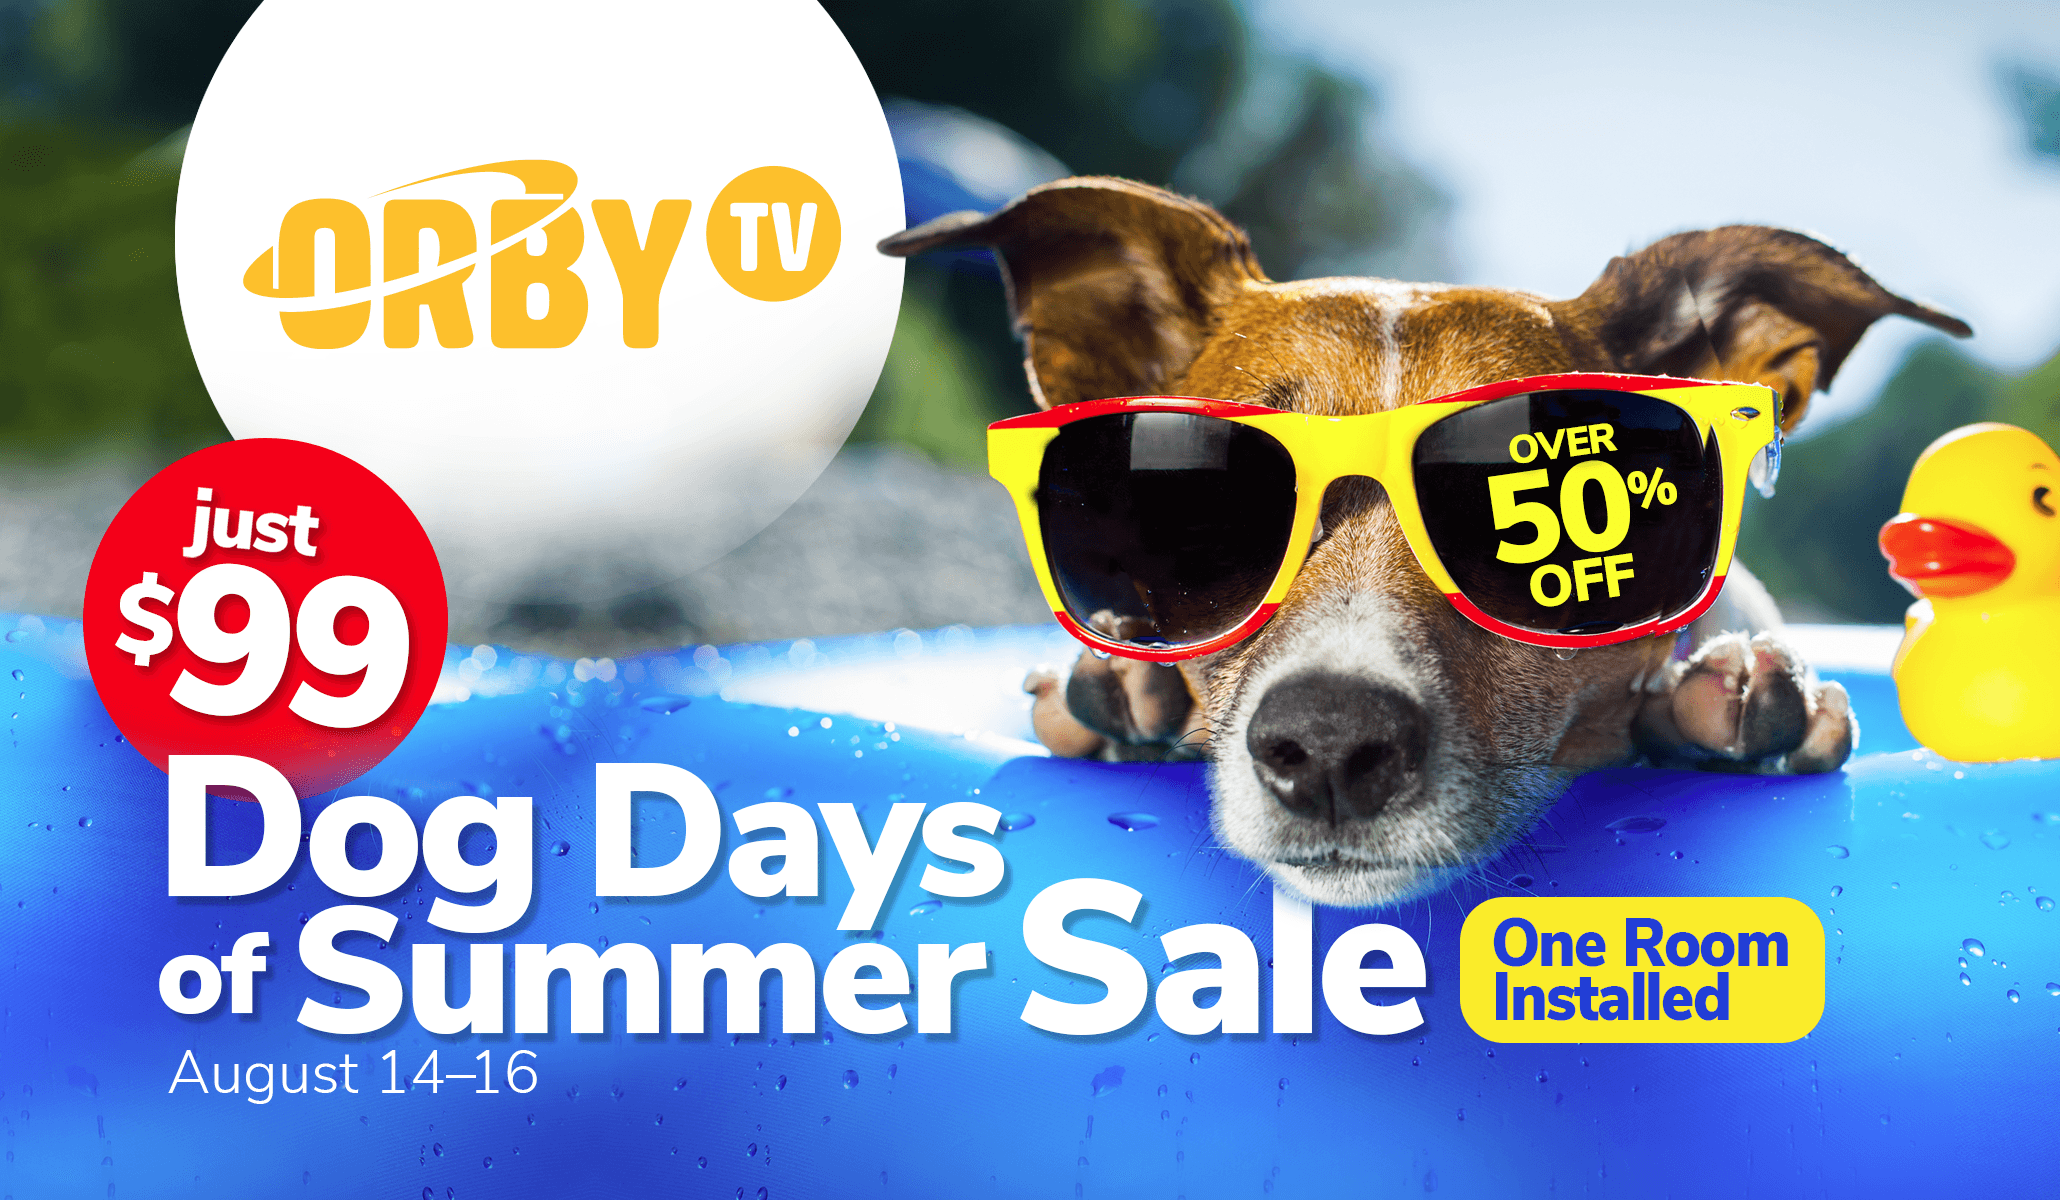 Orby TV’s $99 Sale for New Customers Ends Today